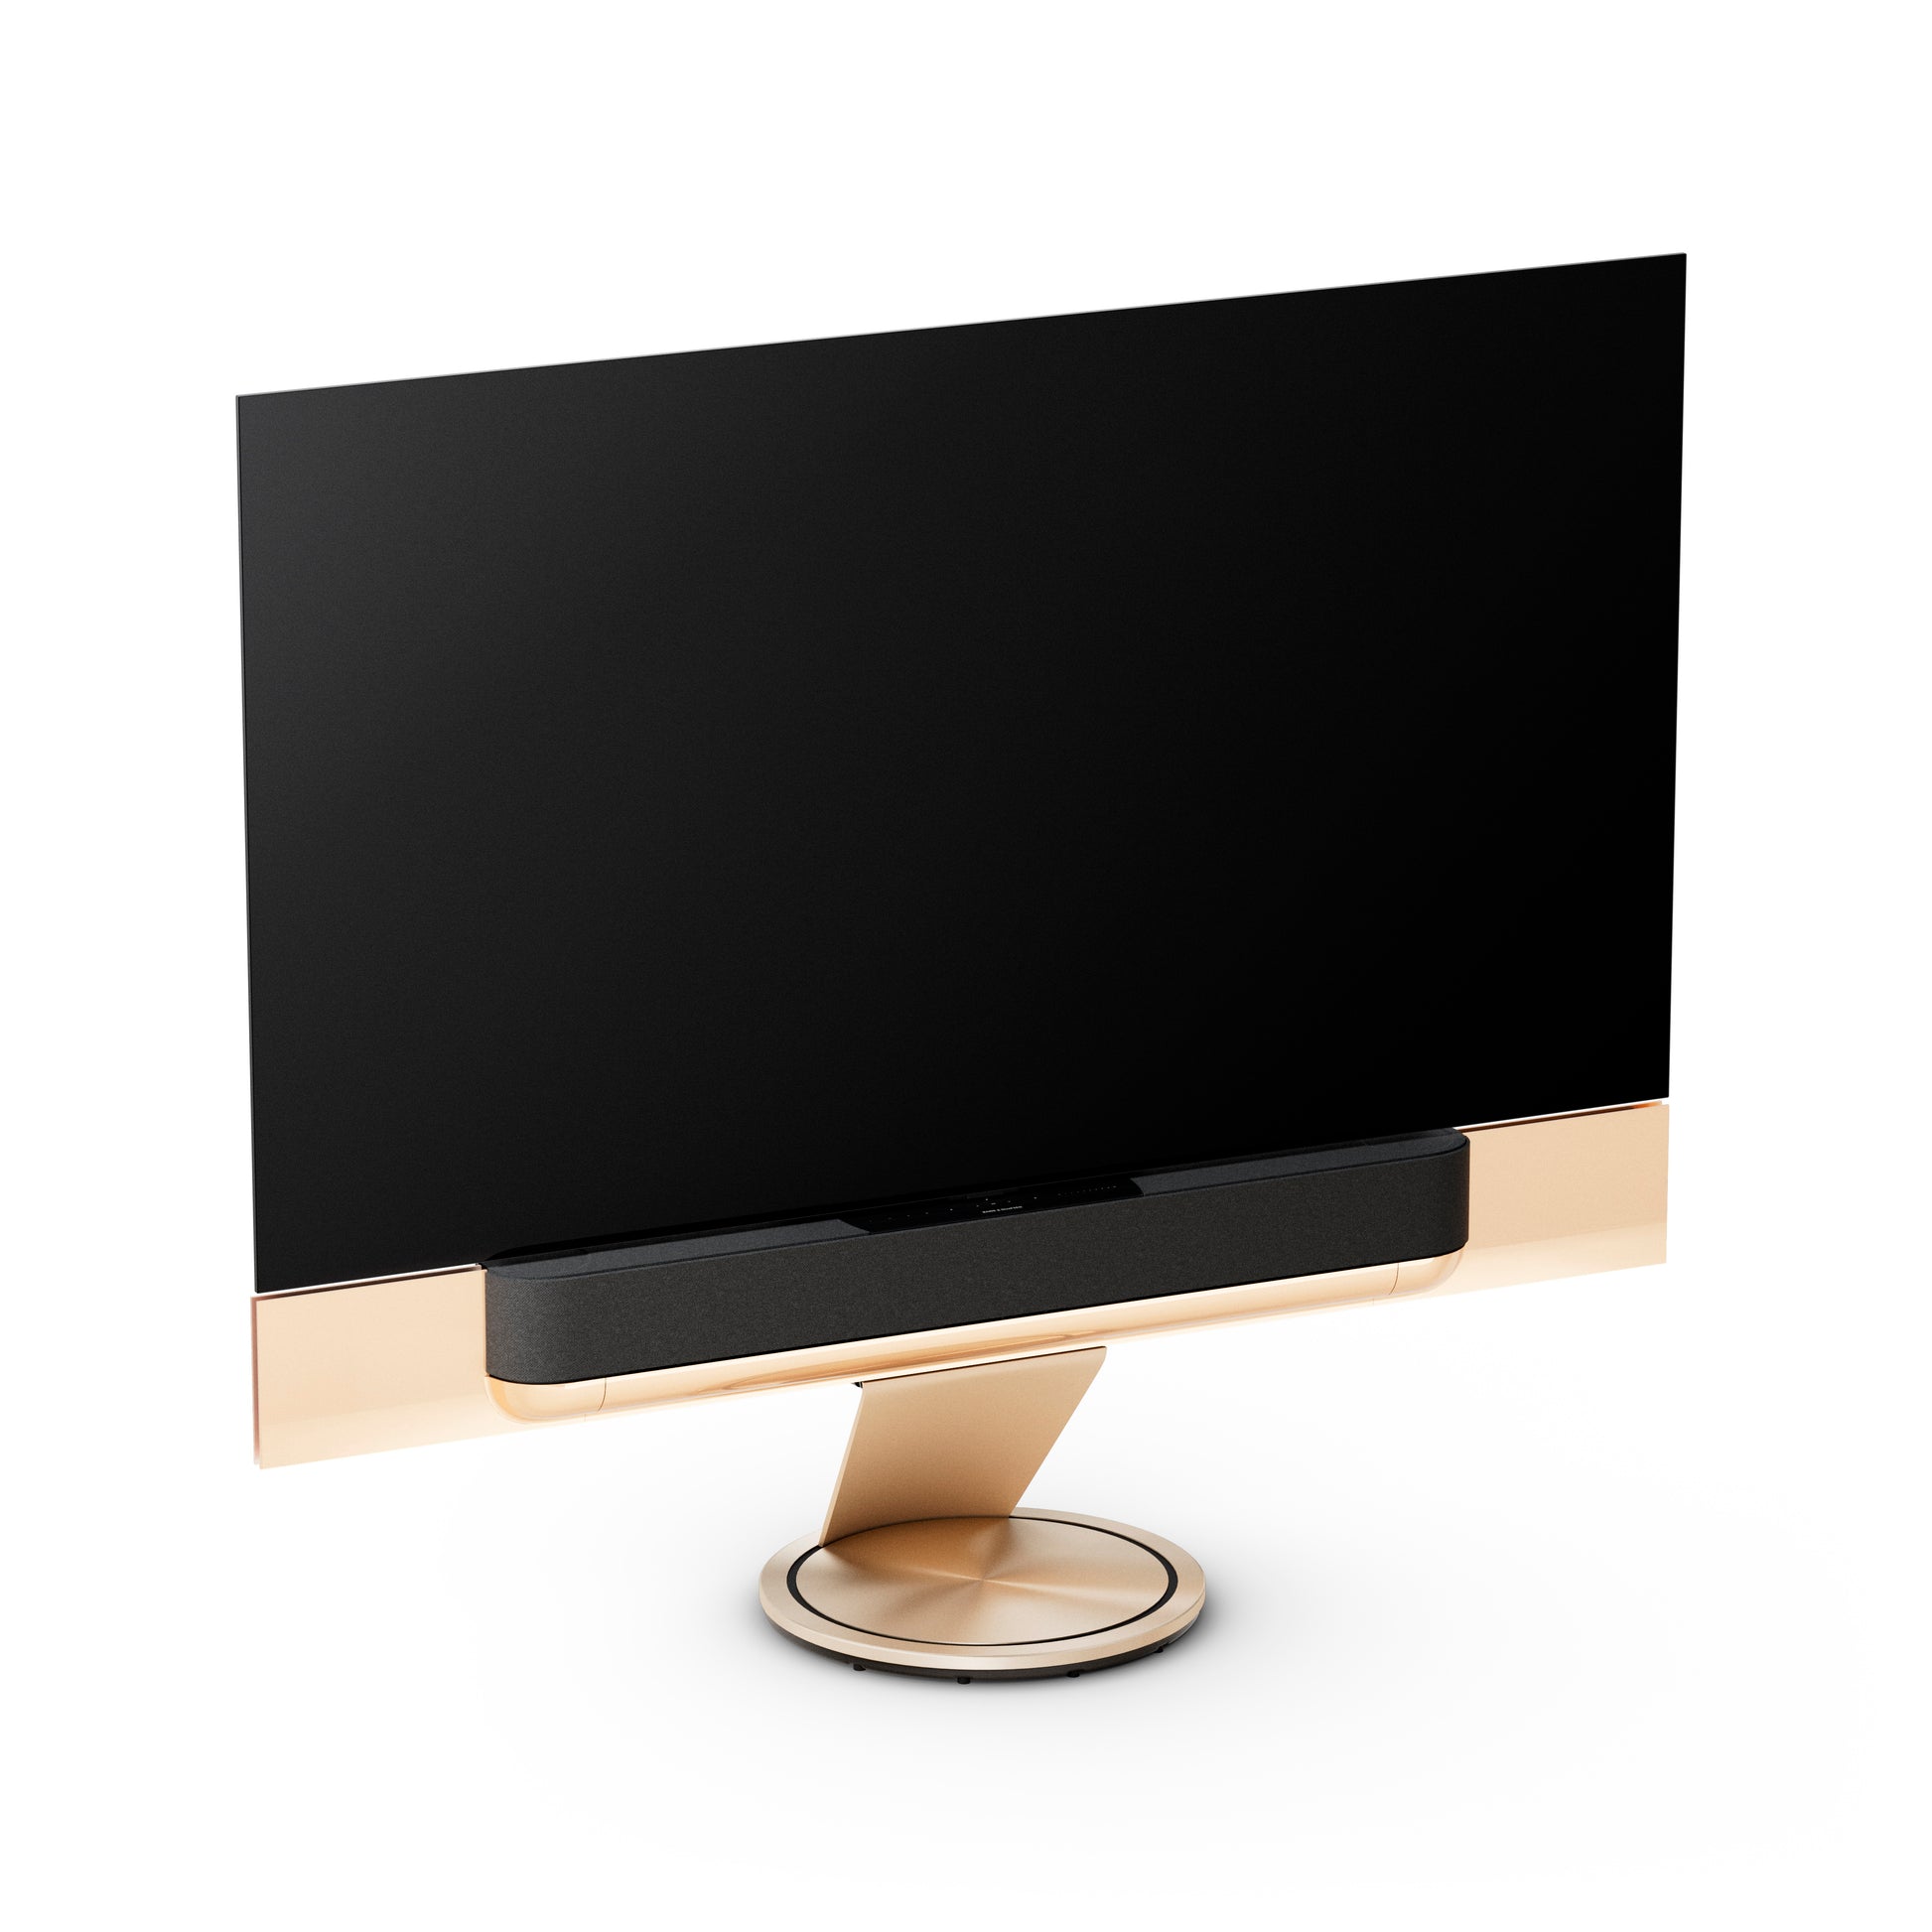 BeoSound Theatre in gold tone as TV in 77 inches  with fabric cover in grey melange on floor stand